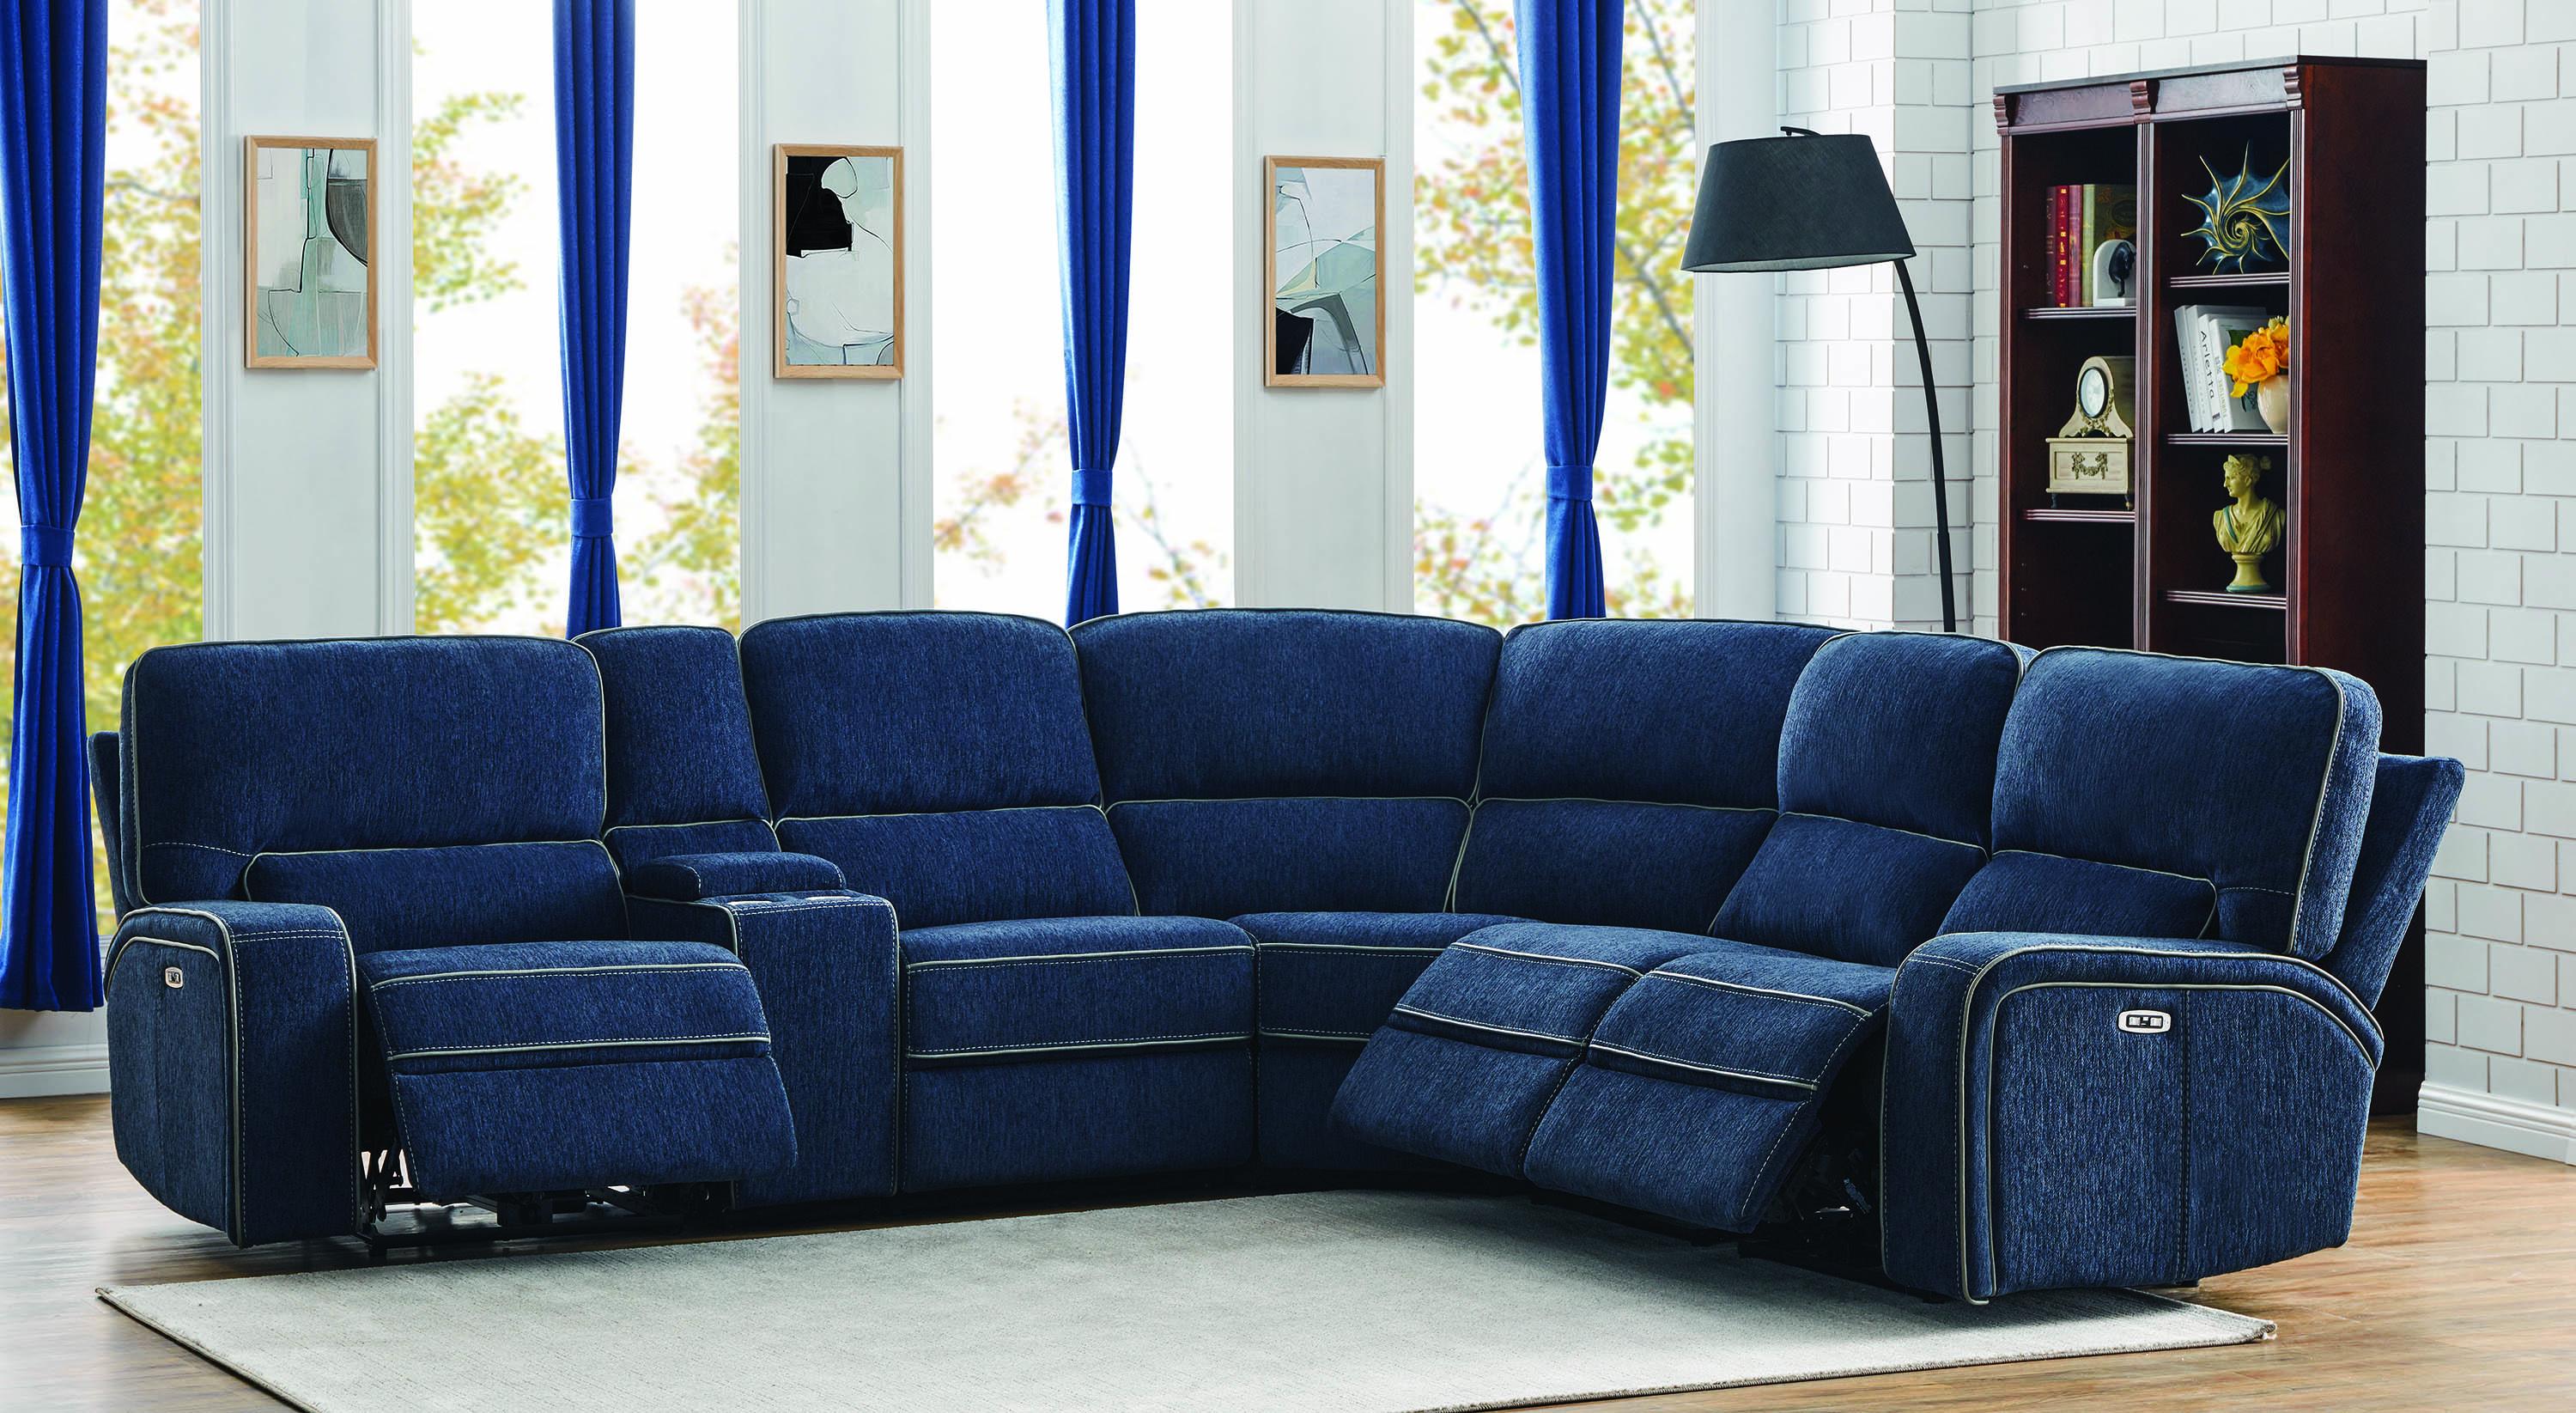 

    
Coaster Dundee 6pc power2 sectional Blue 603370PP
